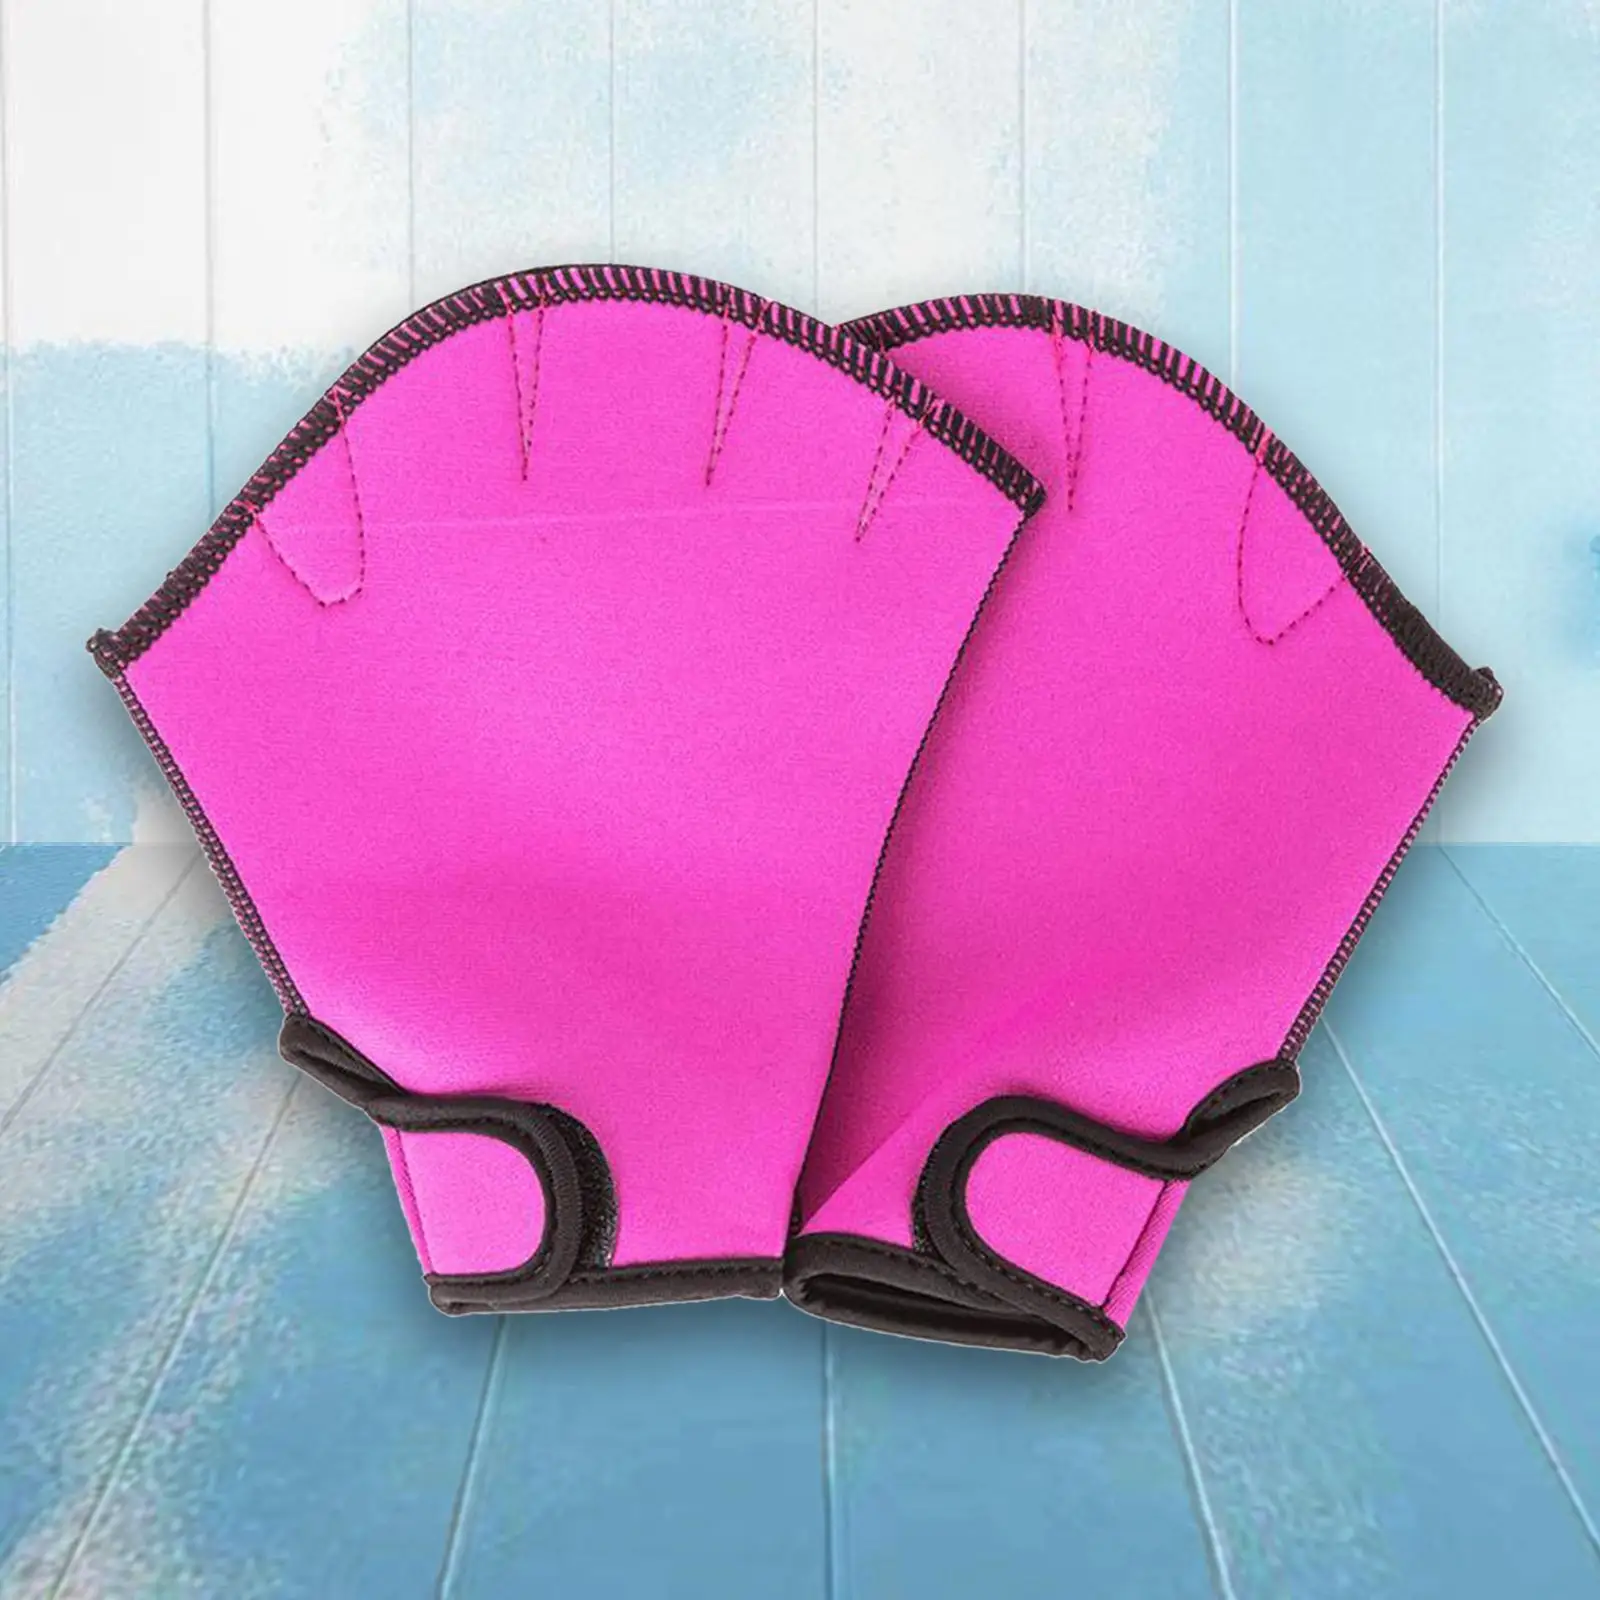 2x 1 Pair Unisex Adult Water Gloves Water Shaped Mesh Swimming Gloves  Snorkeling Surfing Gloves